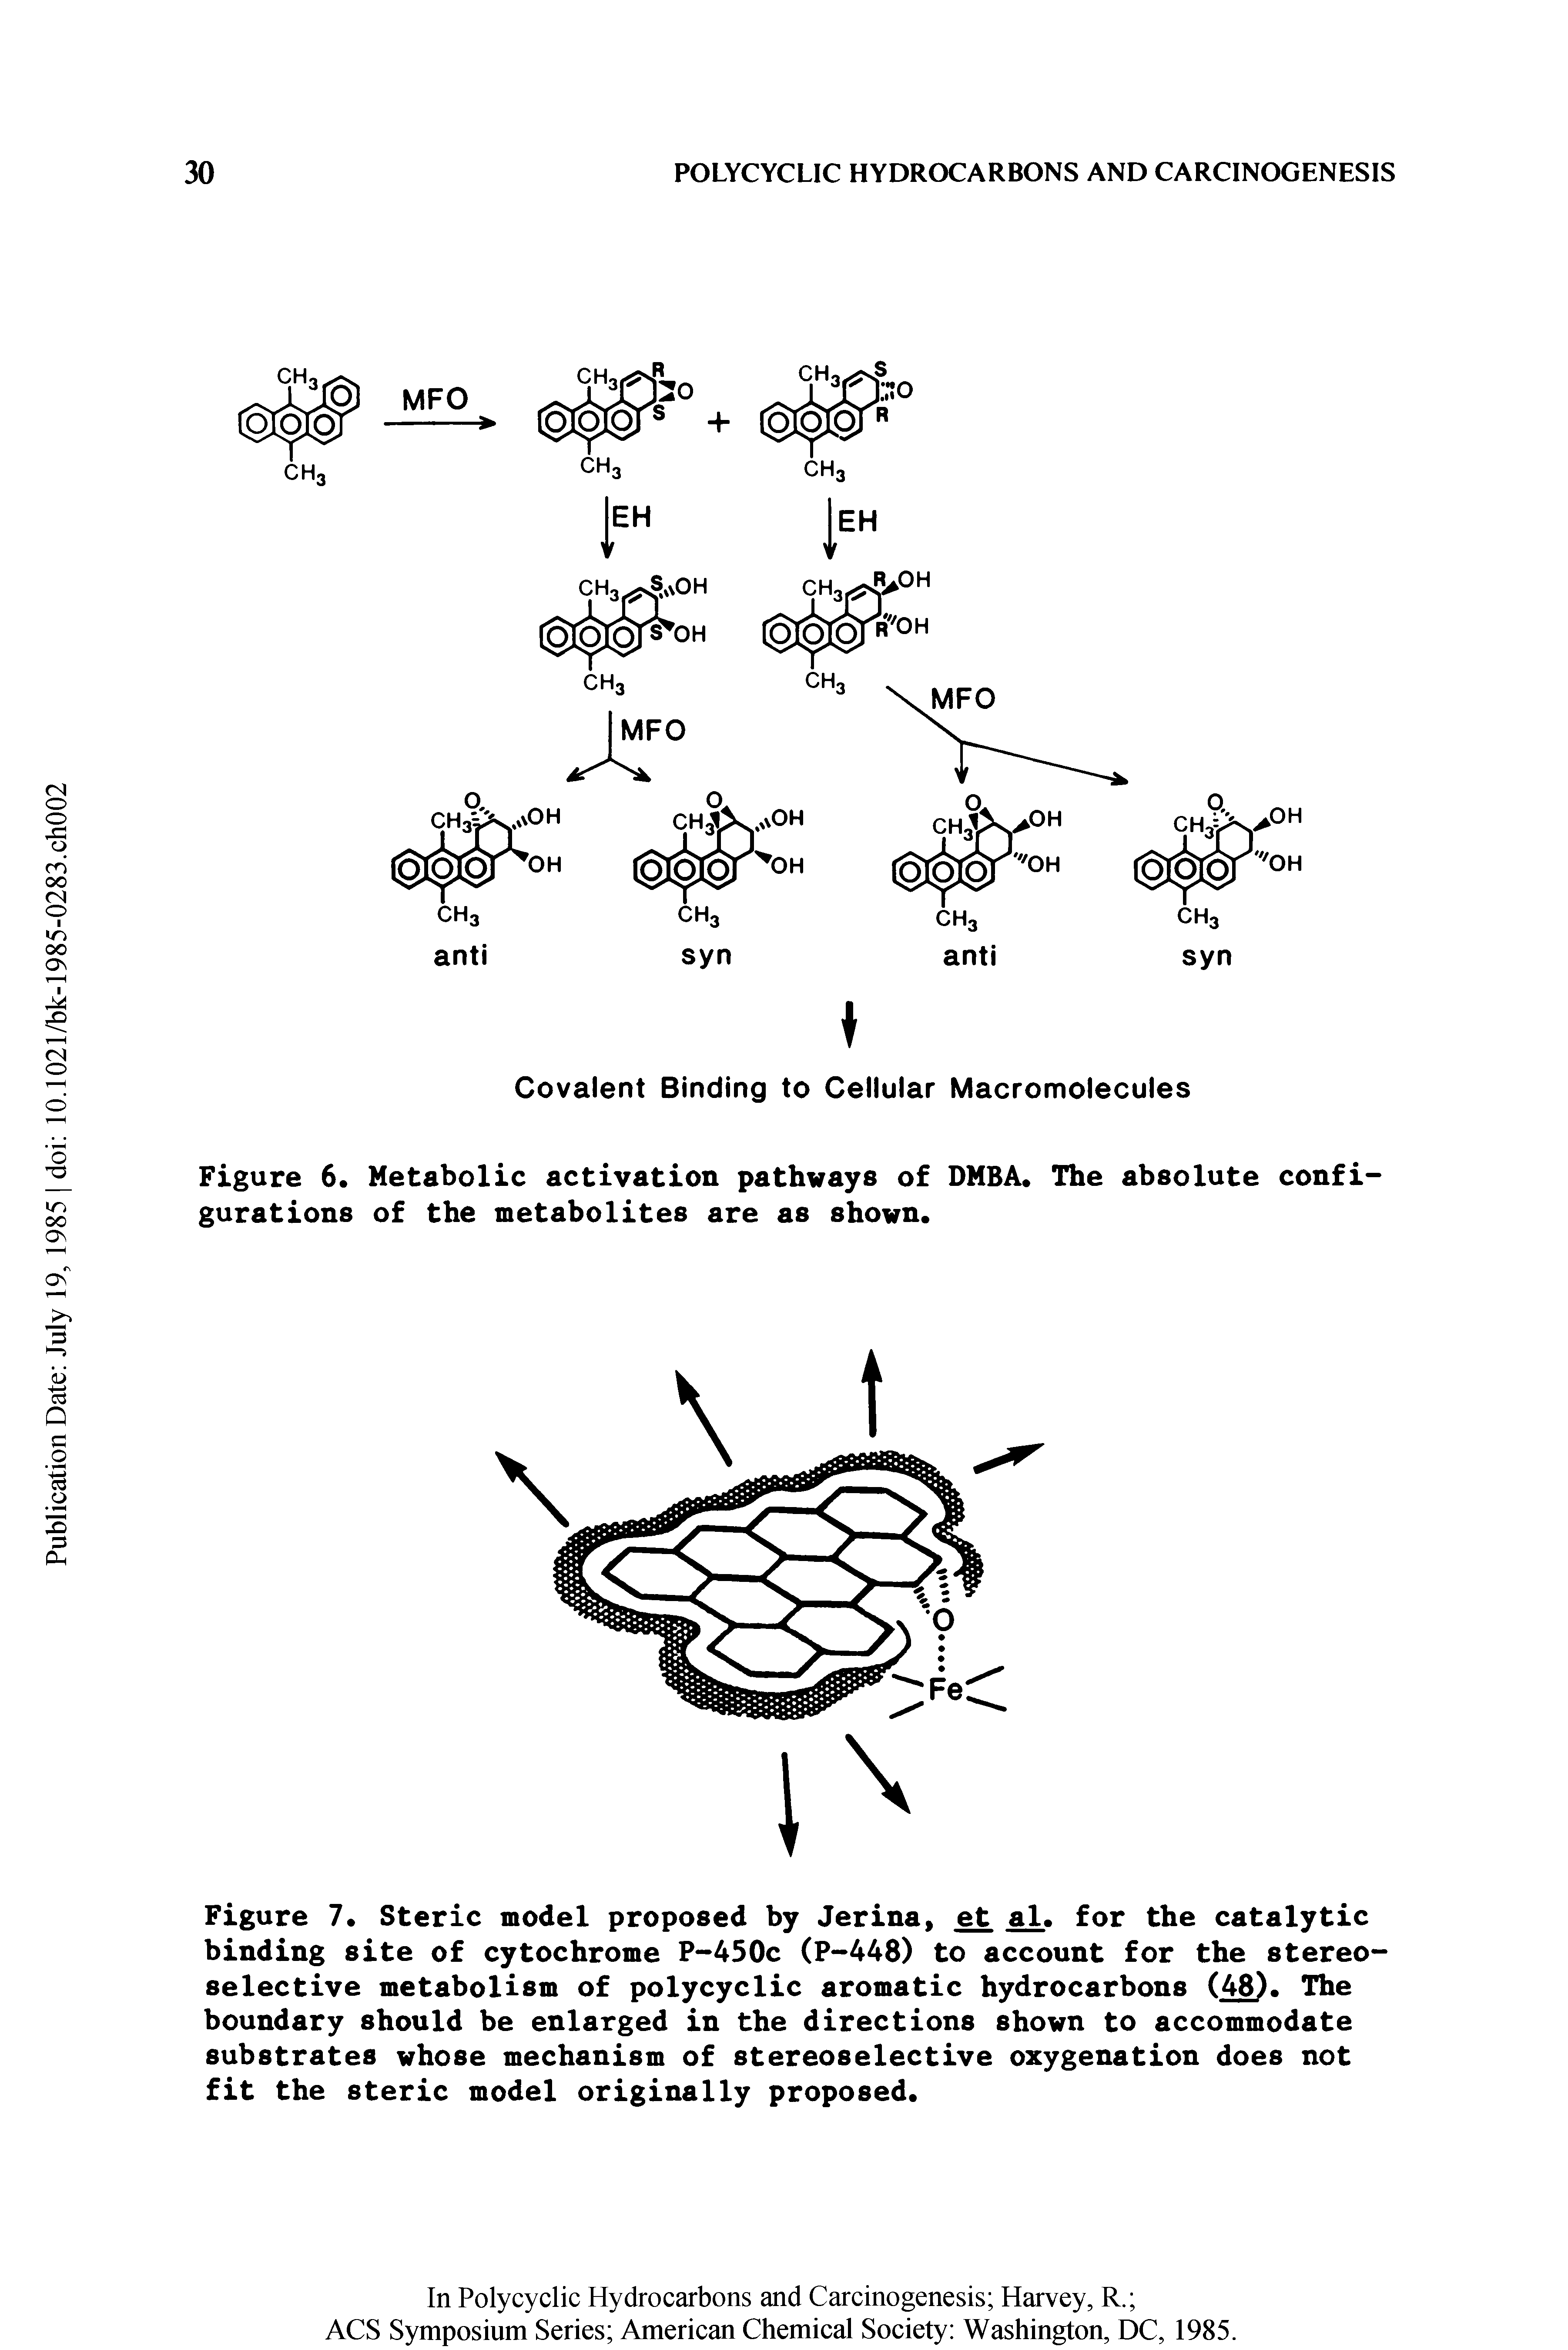 Figure 7. Steric model proposed by Jerina, et al. for the catalytic binding site of cytochrome P-450c (P-448) to account for the stereoselective metabolism of polycyclic aromatic hydrocarbons (48). The boundary should be enlarged in the directions shown to accommodate substrates whose mechanism of stereoselective oxygenation does not fit the steric model originally proposed.